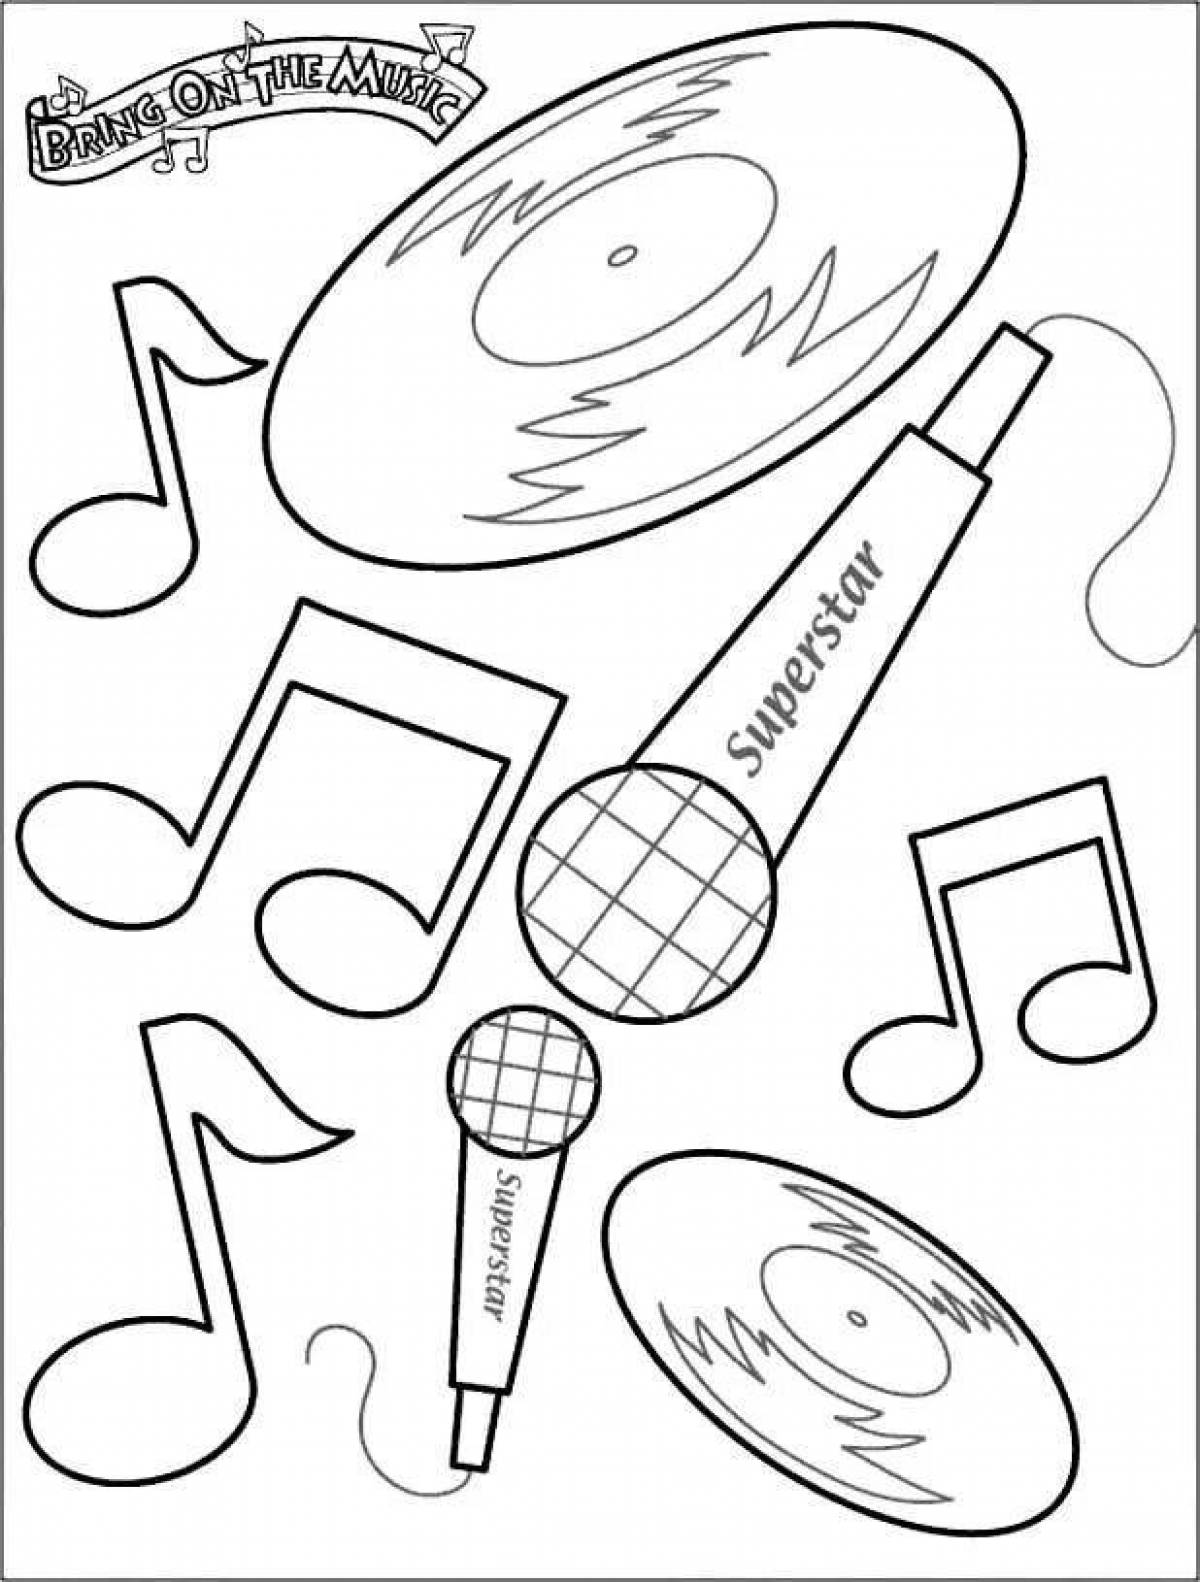 Colorful musical coloring book